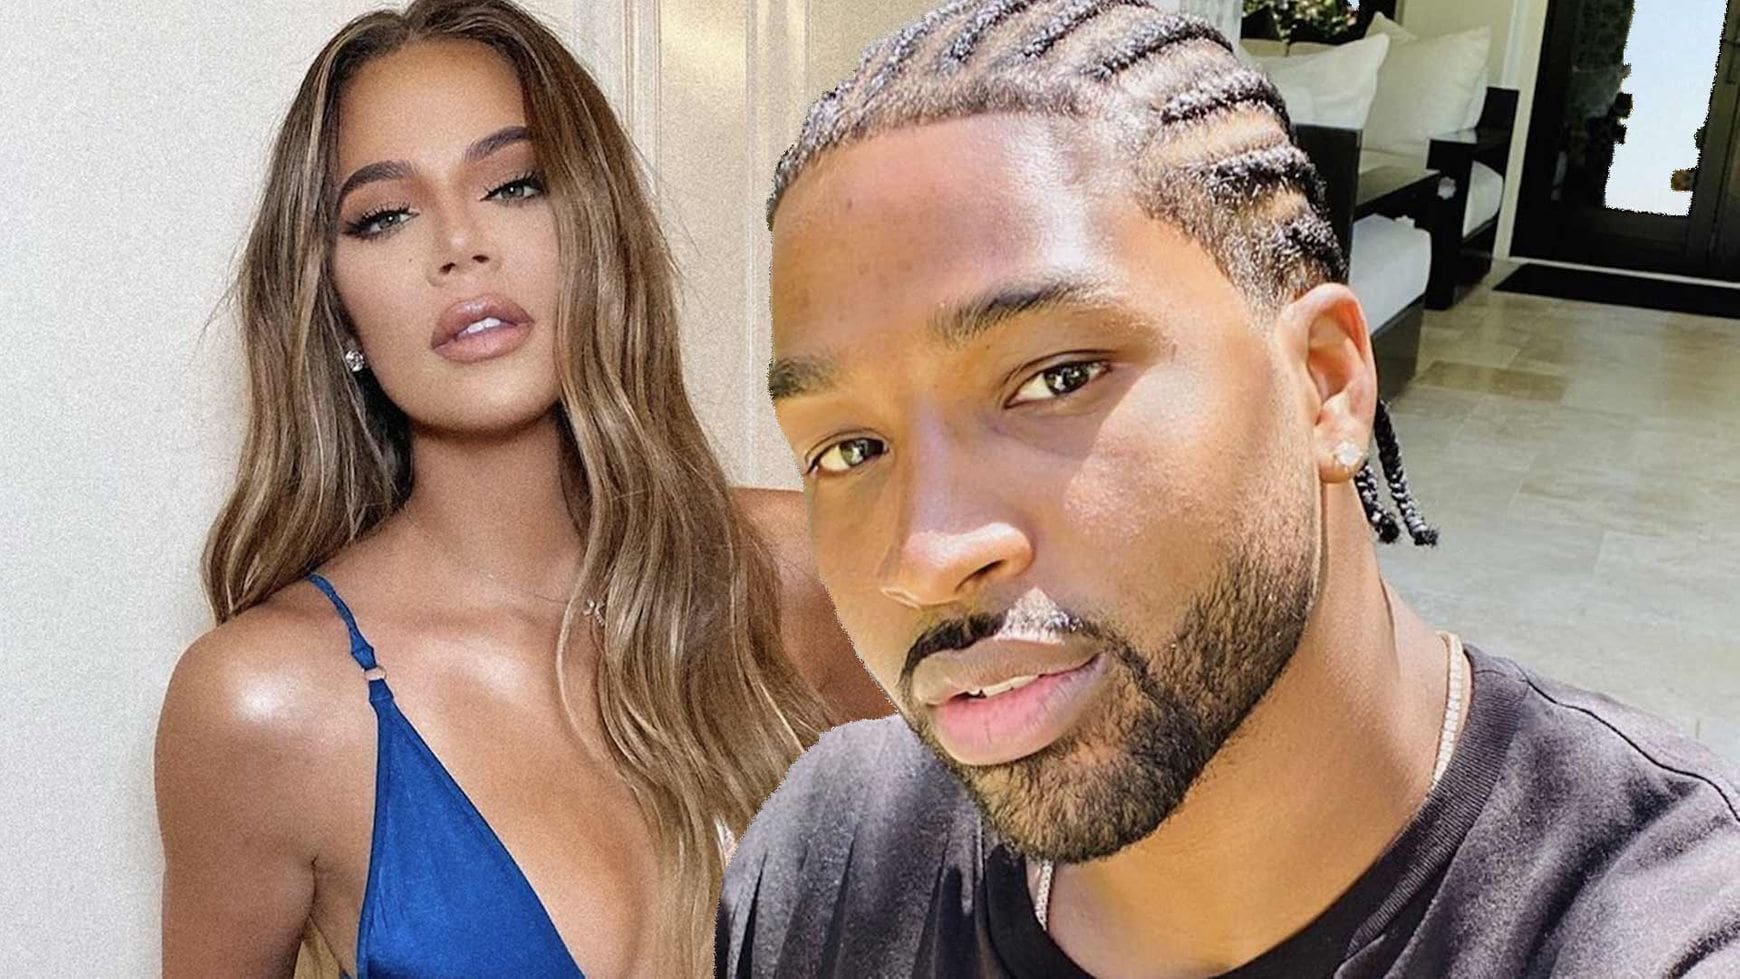 Tristan Thompson Is Spotting Enjoying A Moment With This Lady In Boston - Khloe Kardashian And Baby True Are Thousands Of Miles Away